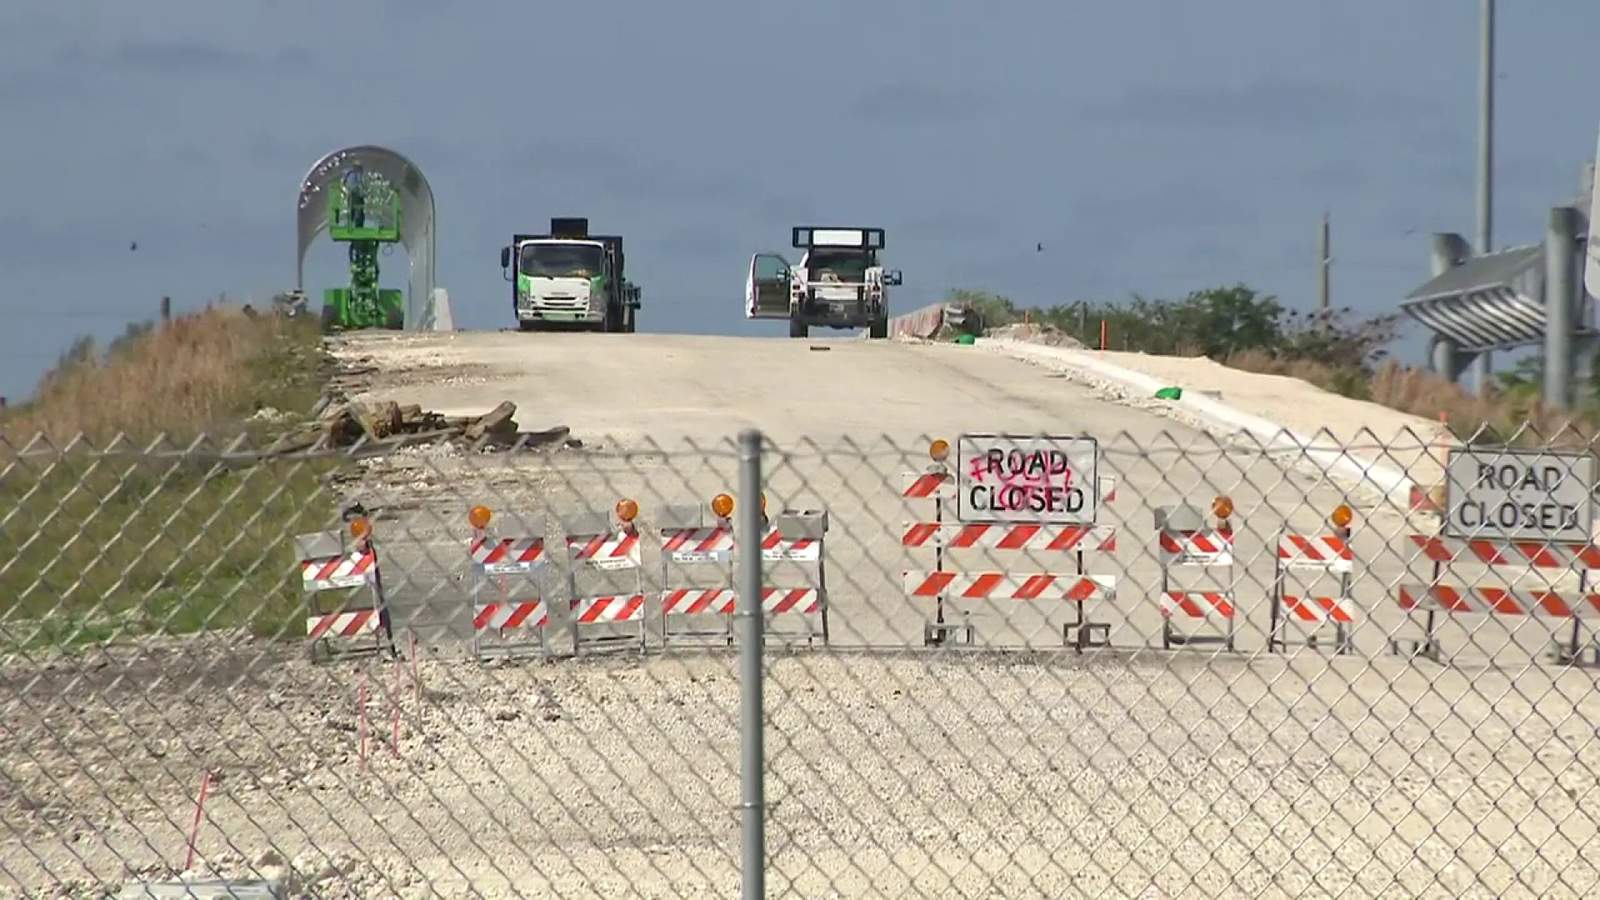 Miami Lakes mayor says town willing to compromise over bridge issue